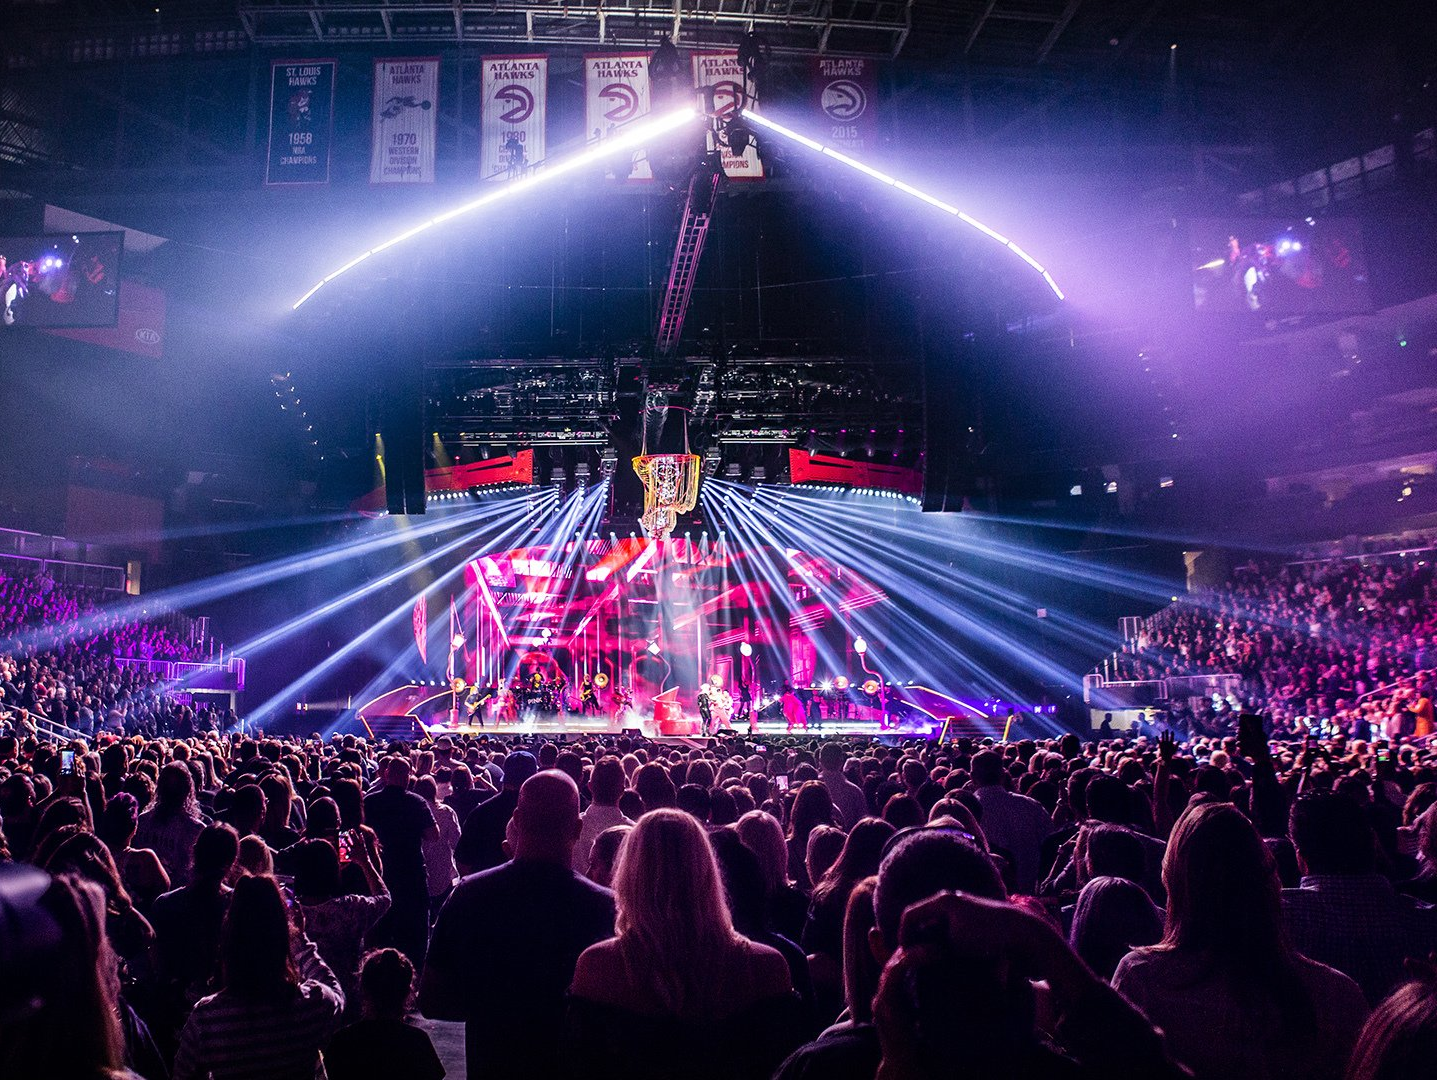 A vibrant live concert scene at an indoor arena, showcasing a packed audience at Allstate Arena